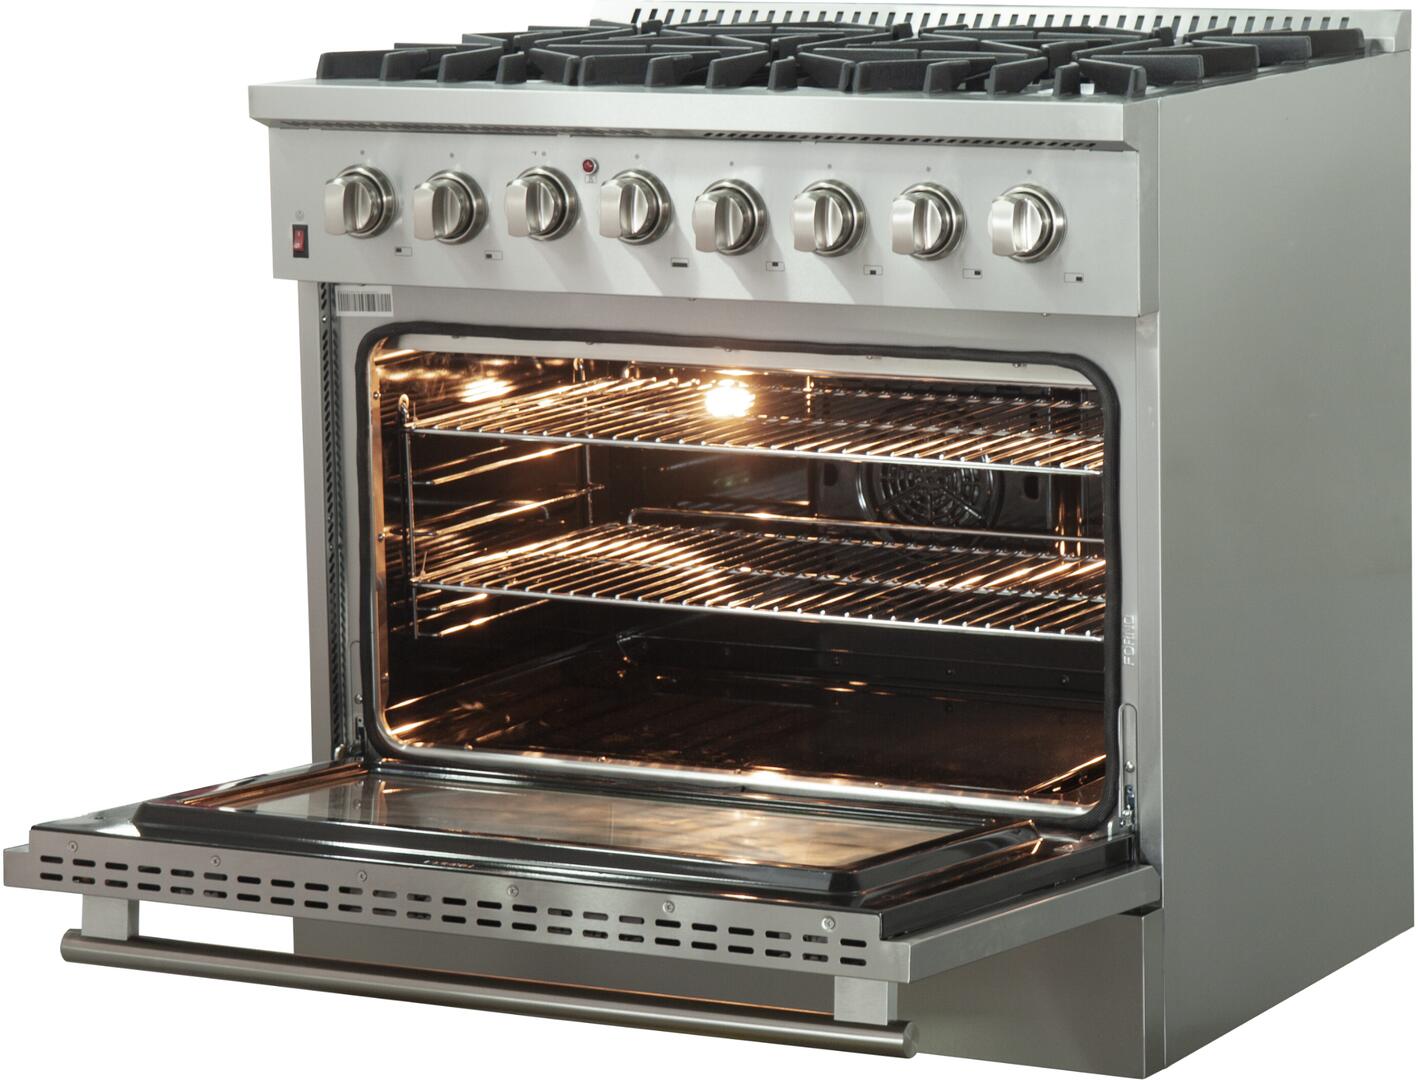 Forno Appliance Package - 36 Inch Dual Fuel Range, 60 Inch Refrigerator, Microwave Drawer, Dishwasher, AP-FFSGS6156-36-7 Appliance Package AP-FFSGS6156-36-7 Luxury Appliances Direct